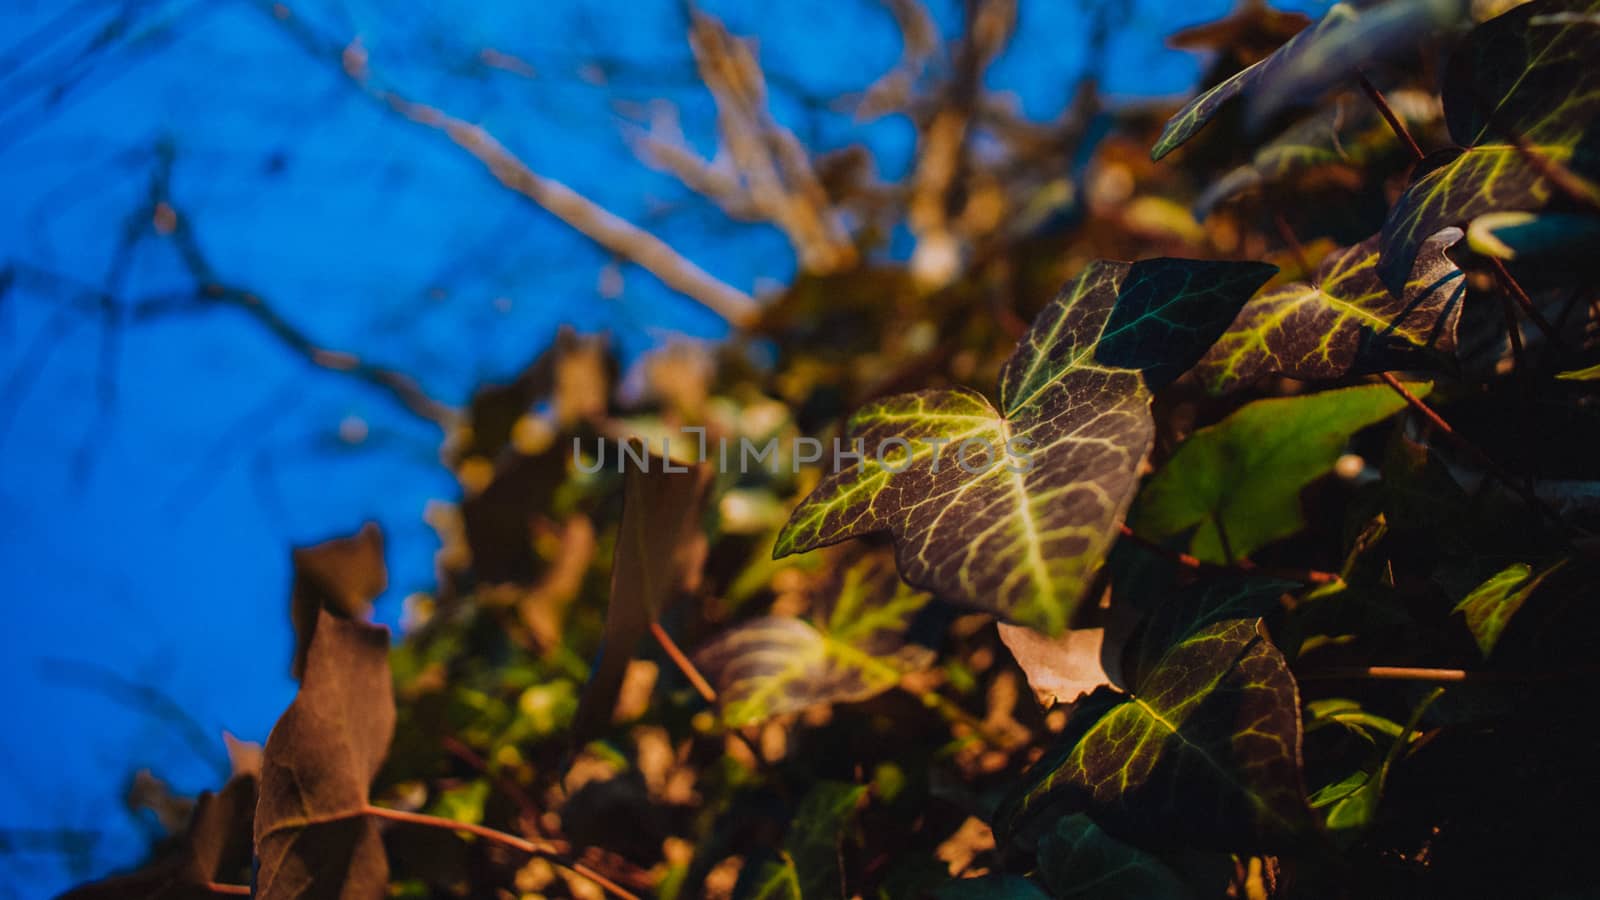 A Close-Up Shot of an Ivy Plant Growing Up a Tree on a Clear Blue Sky